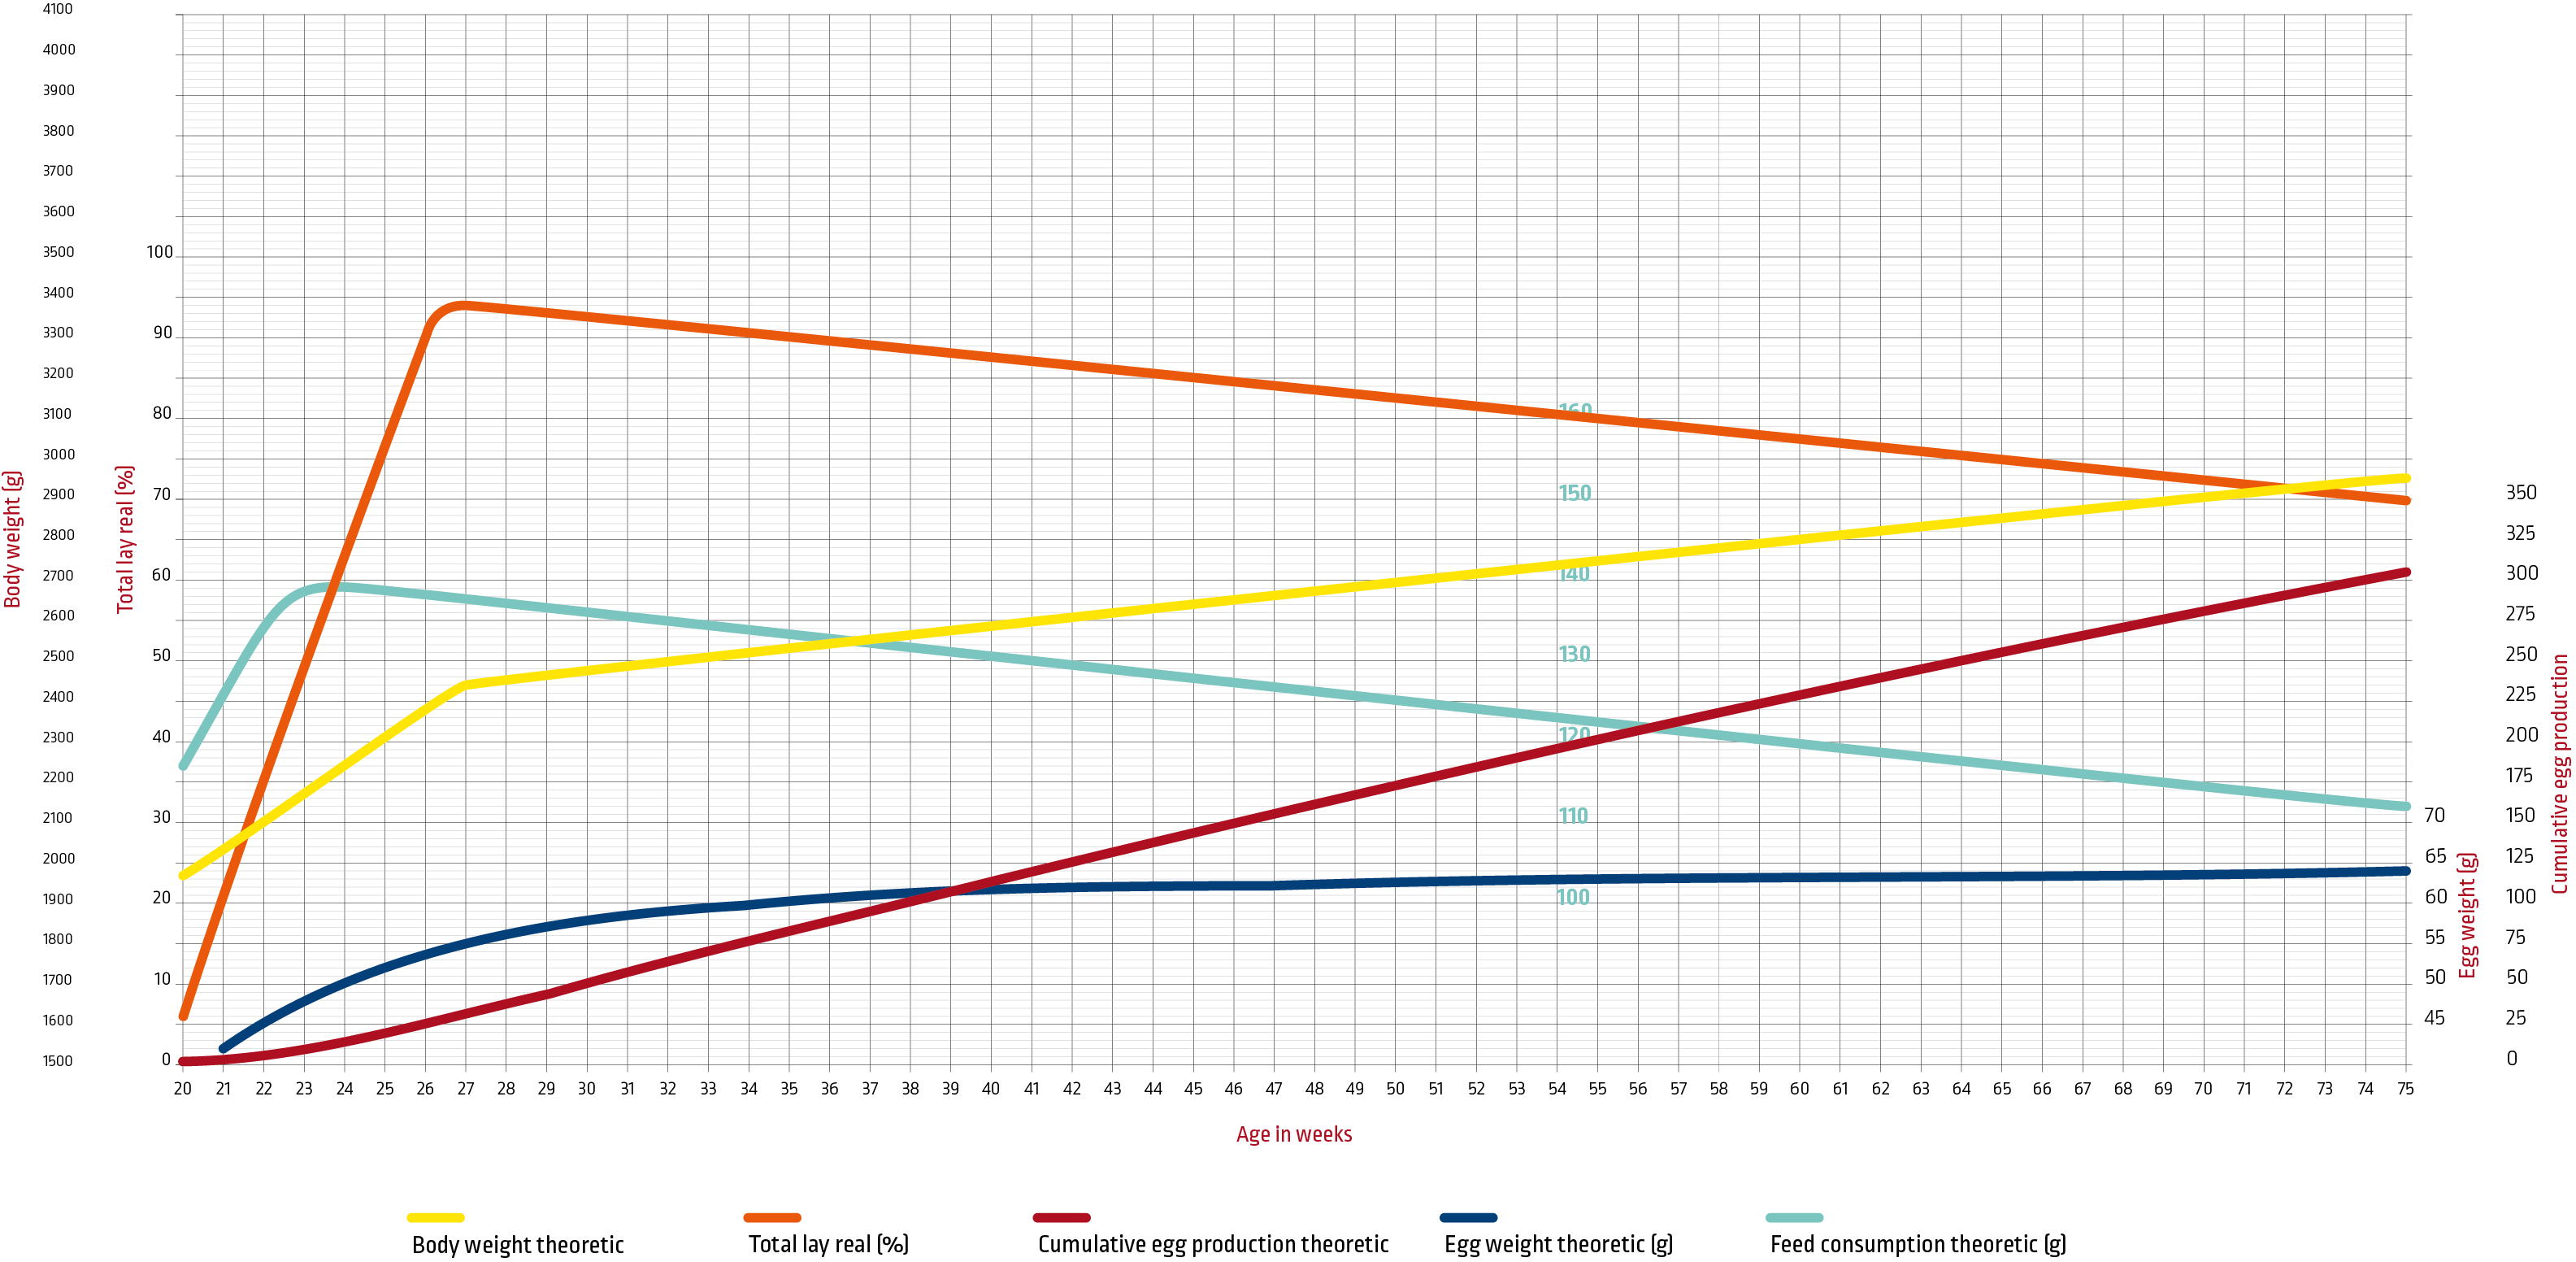 Scarlet_North America_Laying chart.png